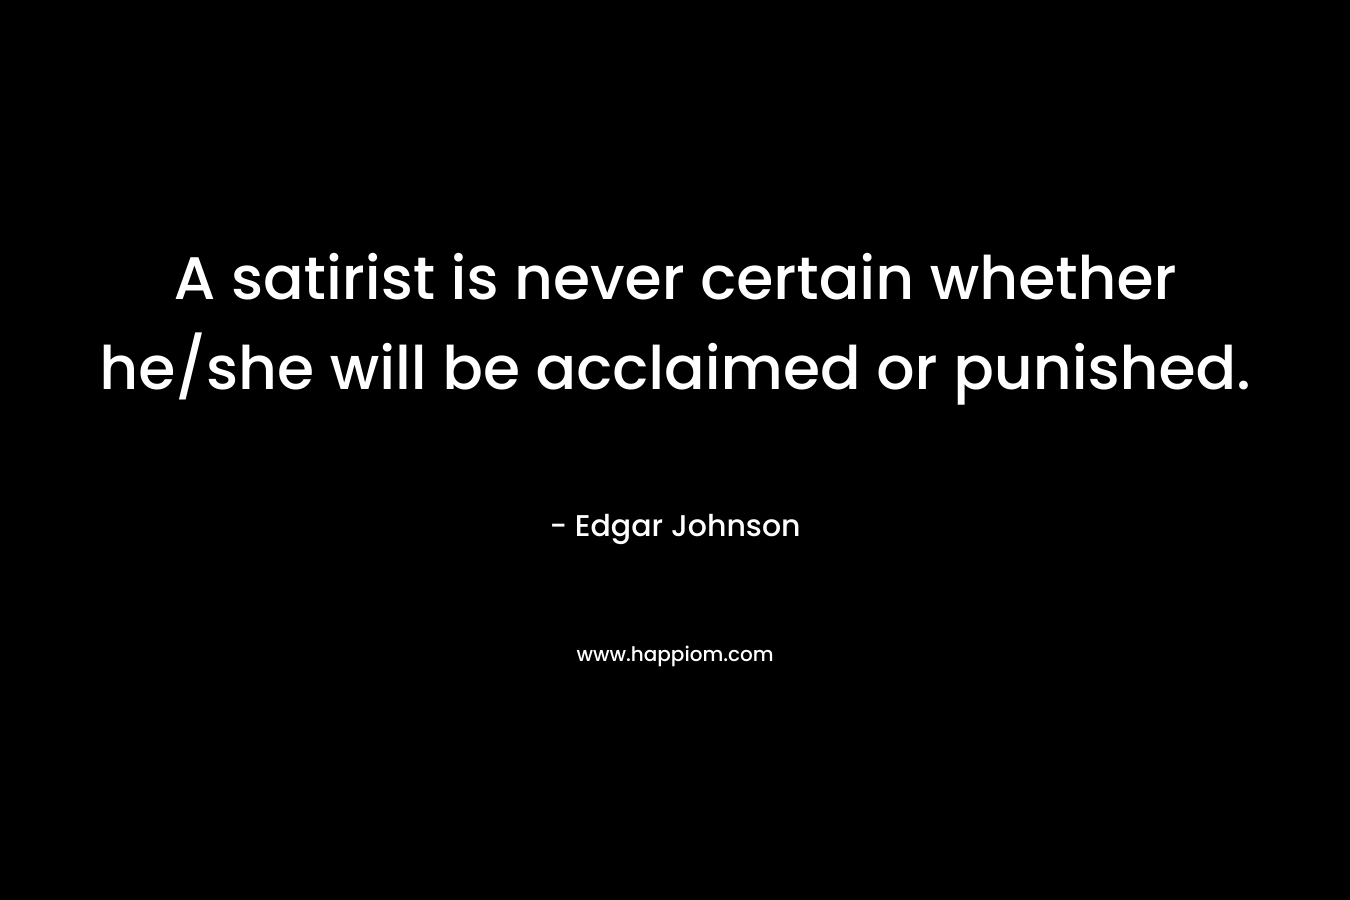 A satirist is never certain whether he/she will be acclaimed or punished.